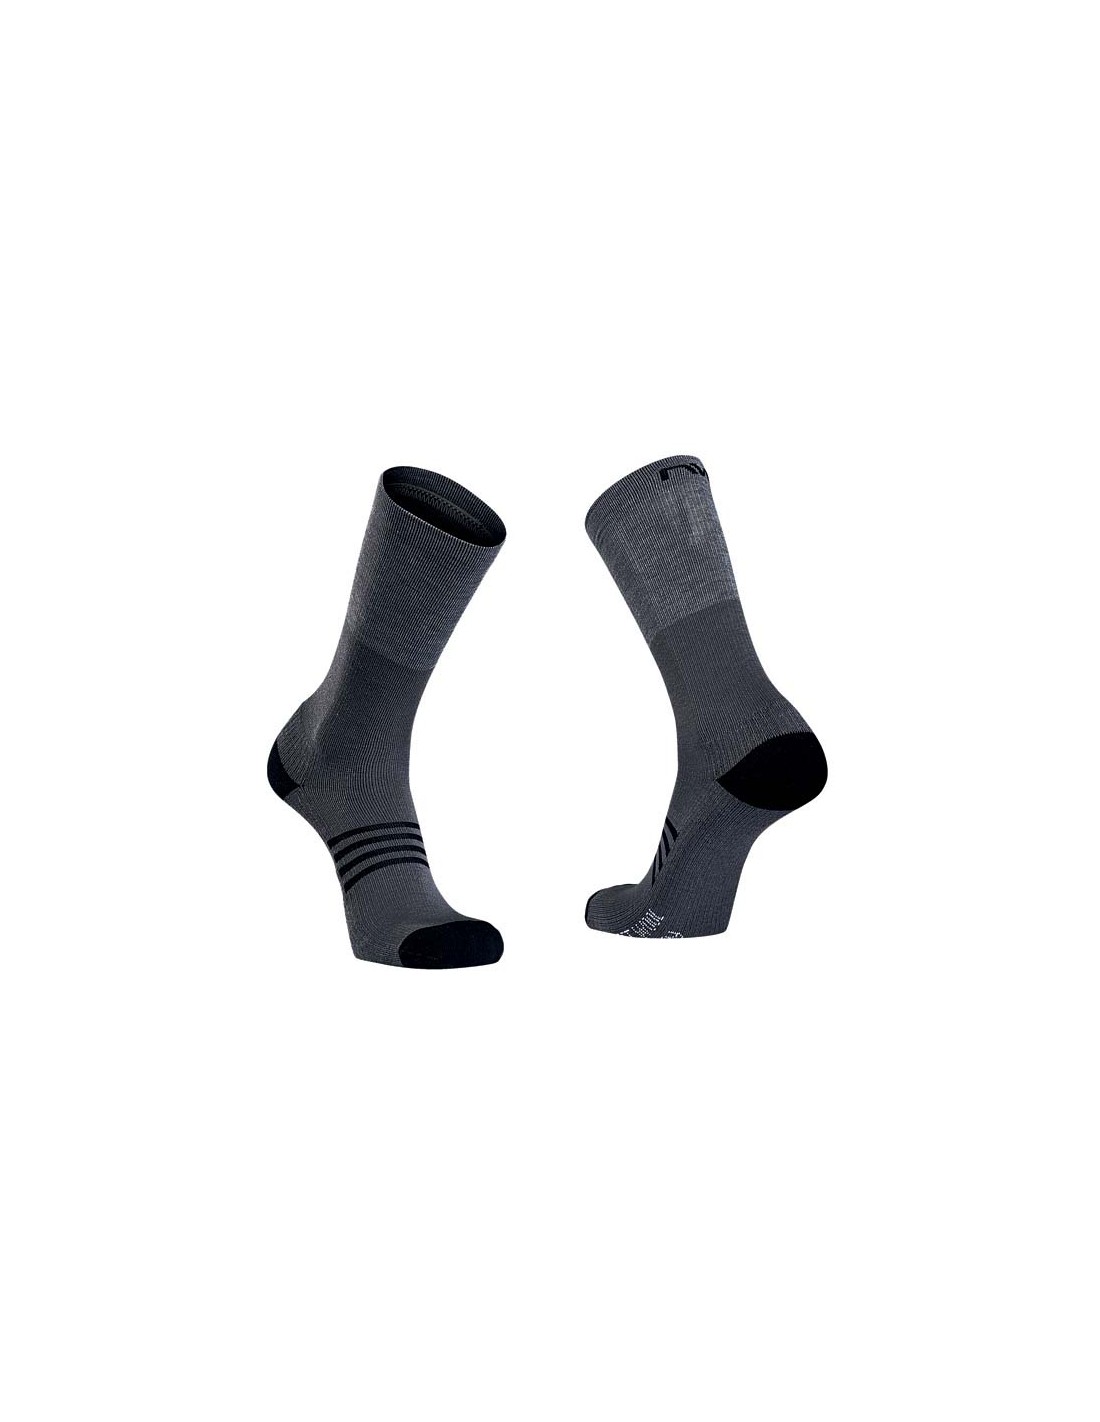 Details about   NORTHWAVE Calcetin Extreme Pro YELLOW-BLK NW21C8921201541 Footwear Socks Long 